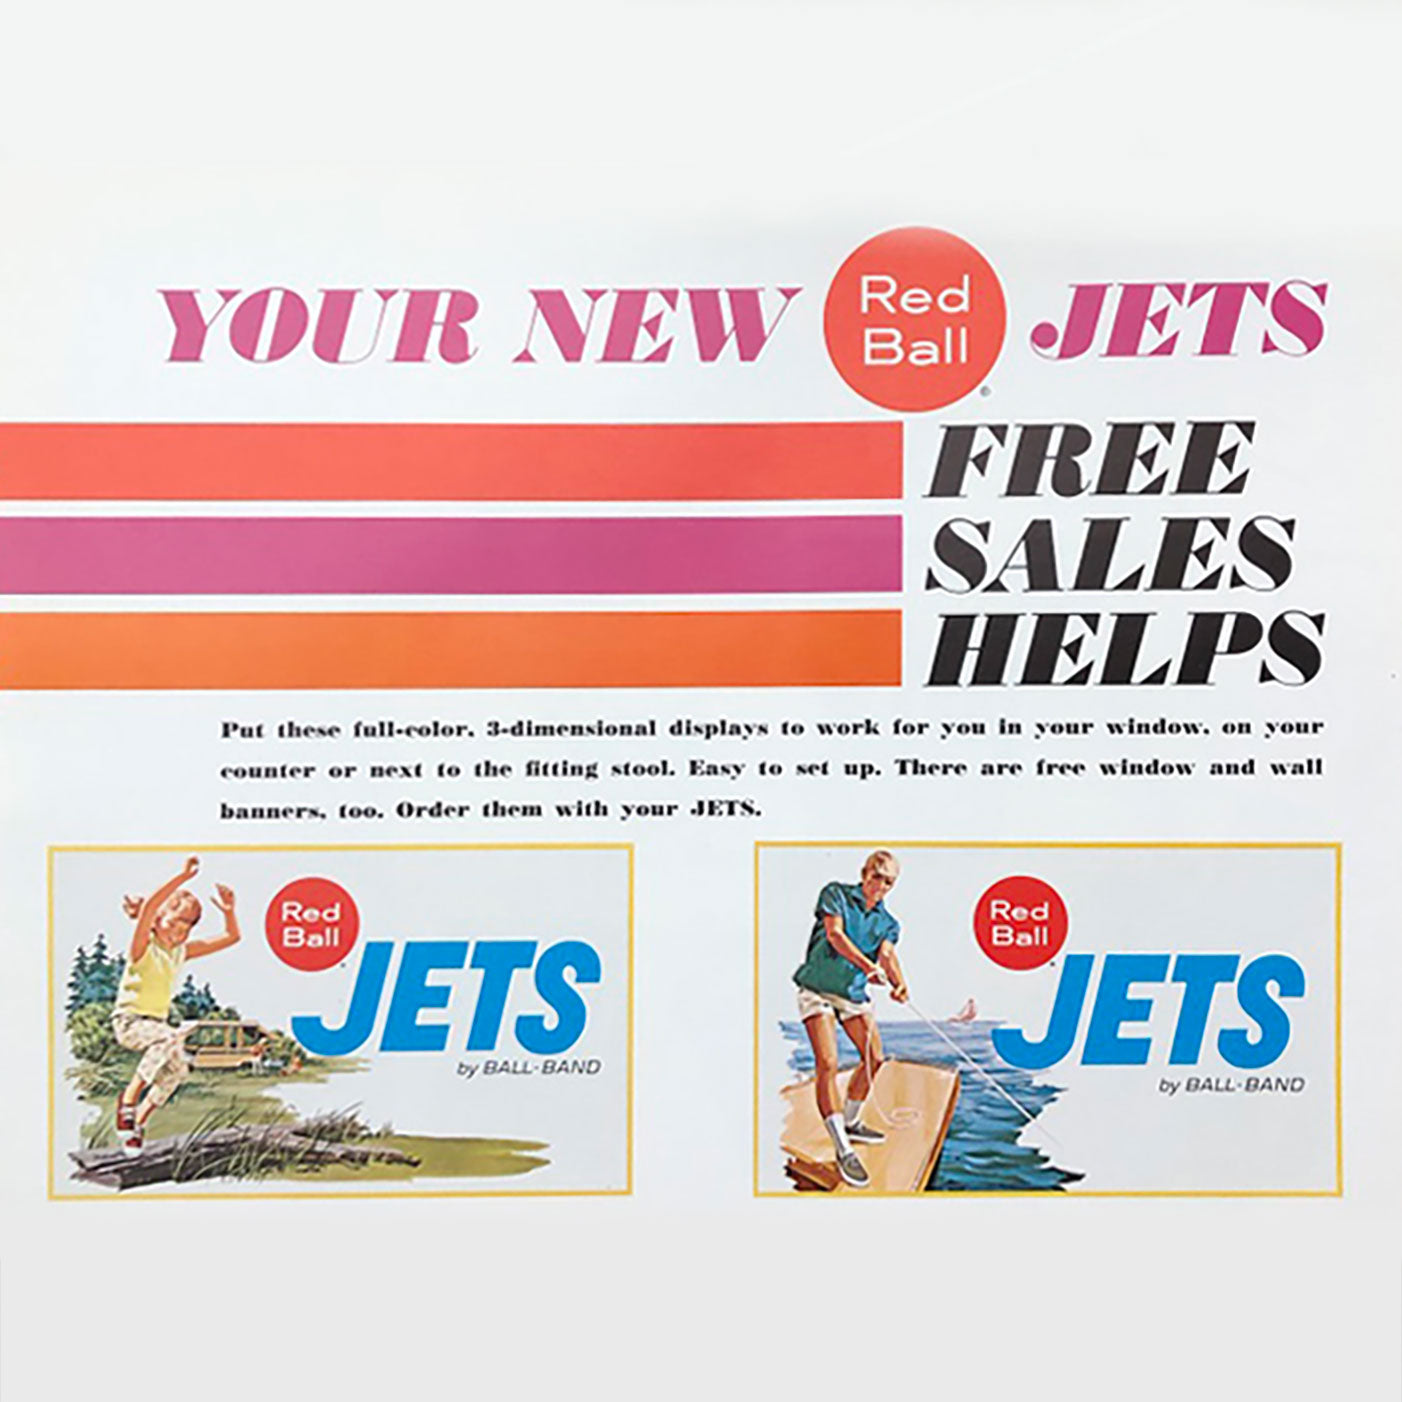 a vintage advertisement from the red ball jets